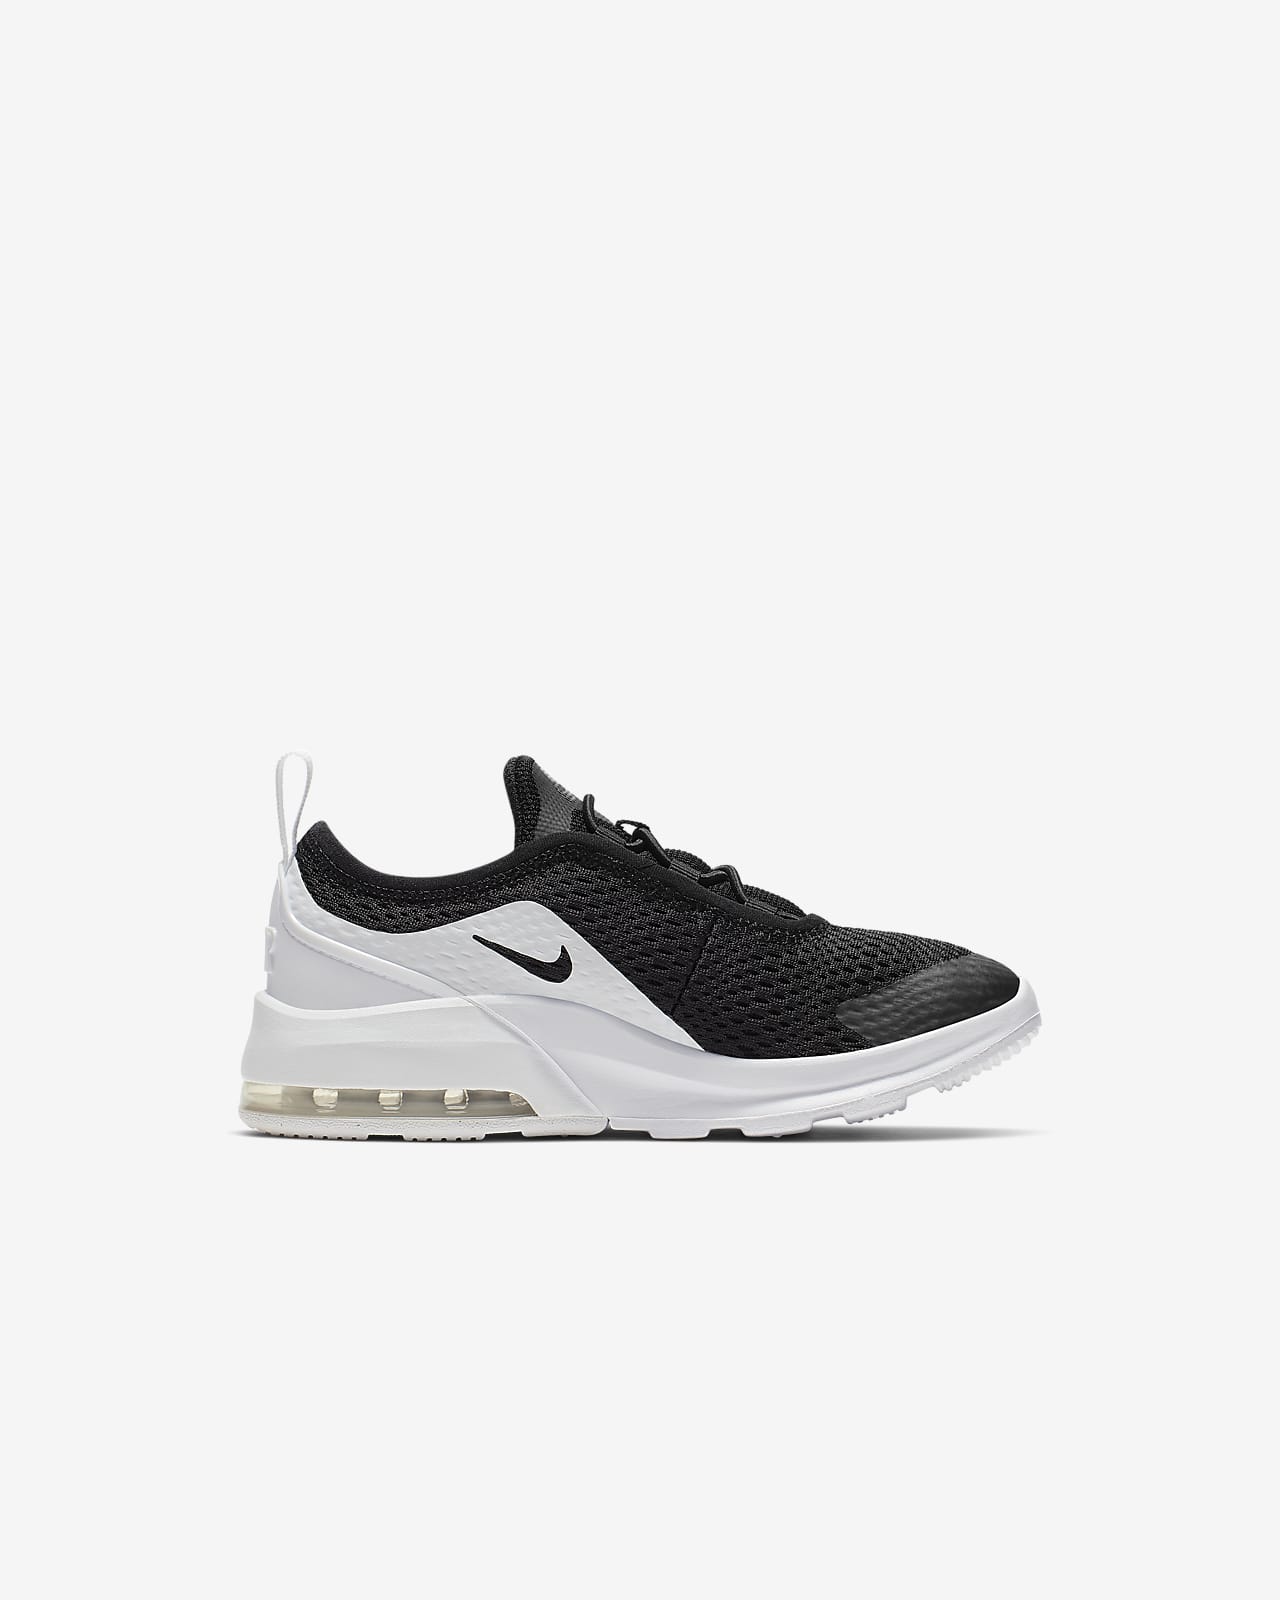 nike air max motion 2 women's price philippines